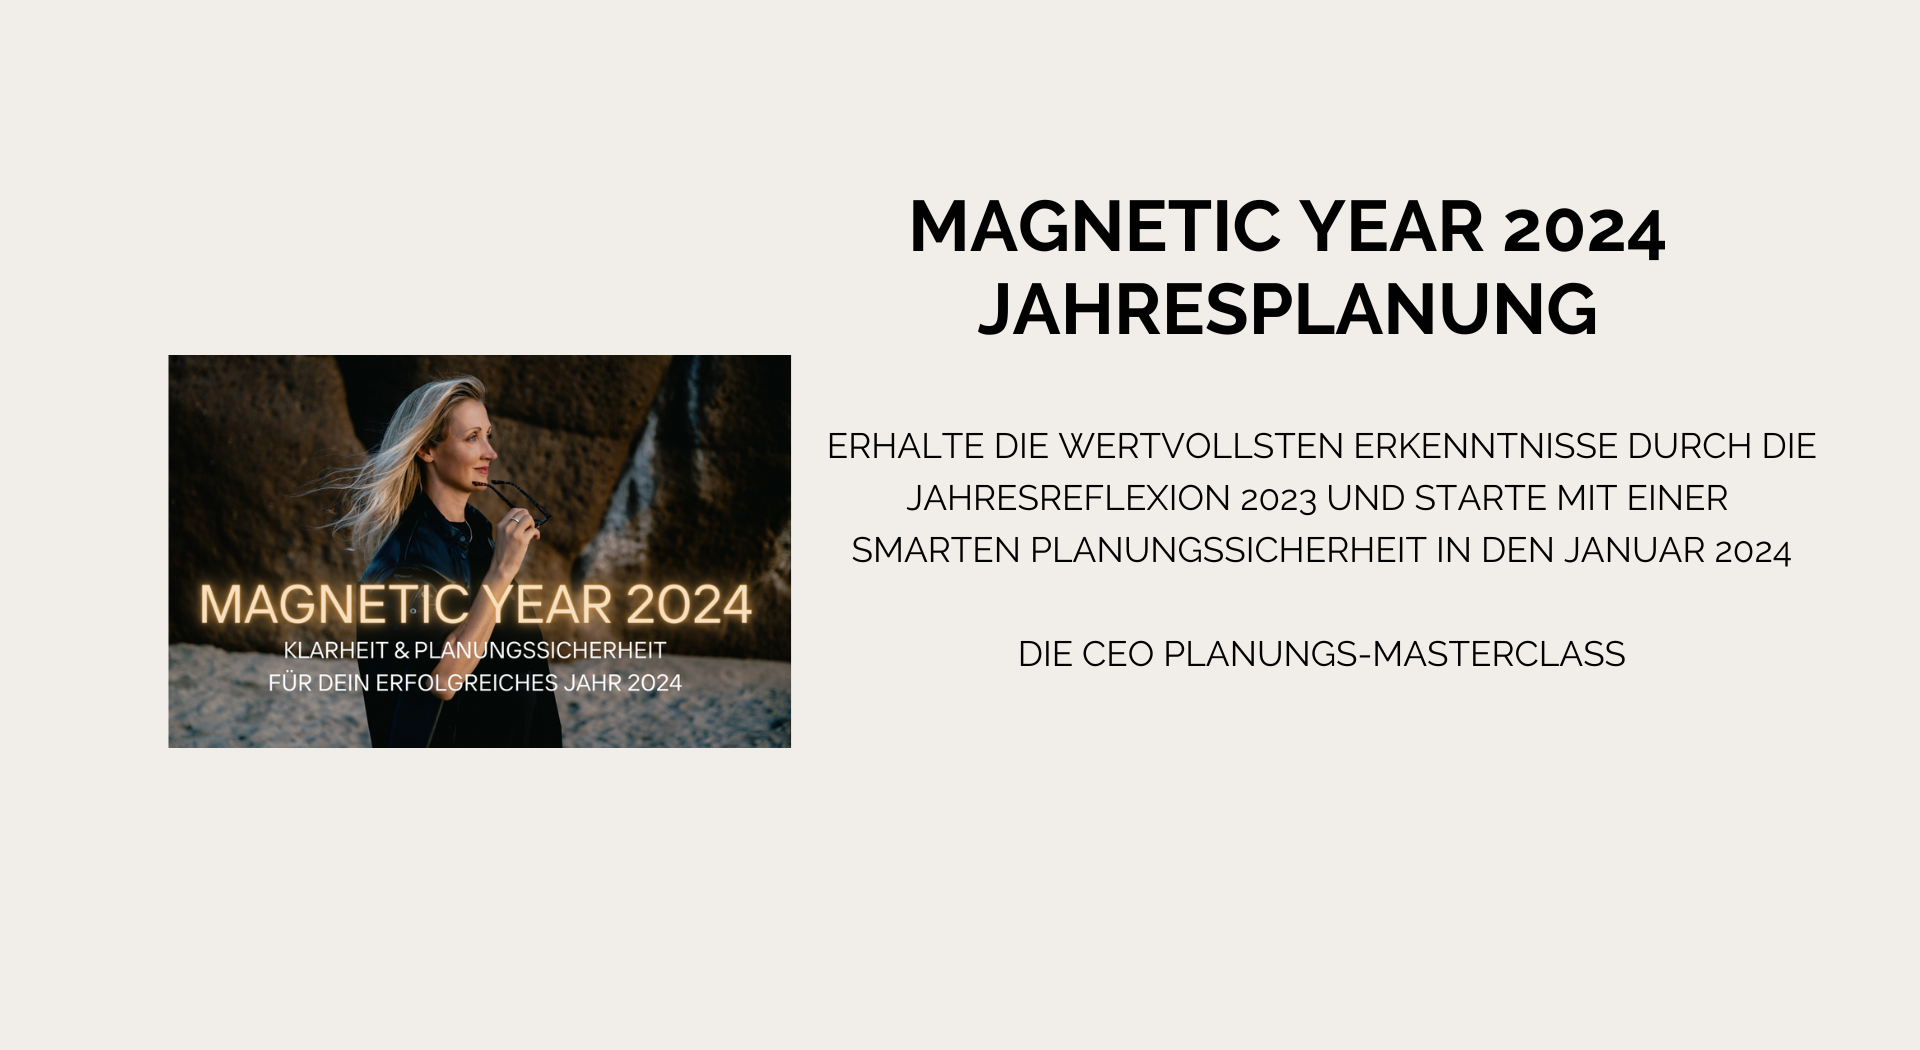 MAGNETIC YEAR 2024